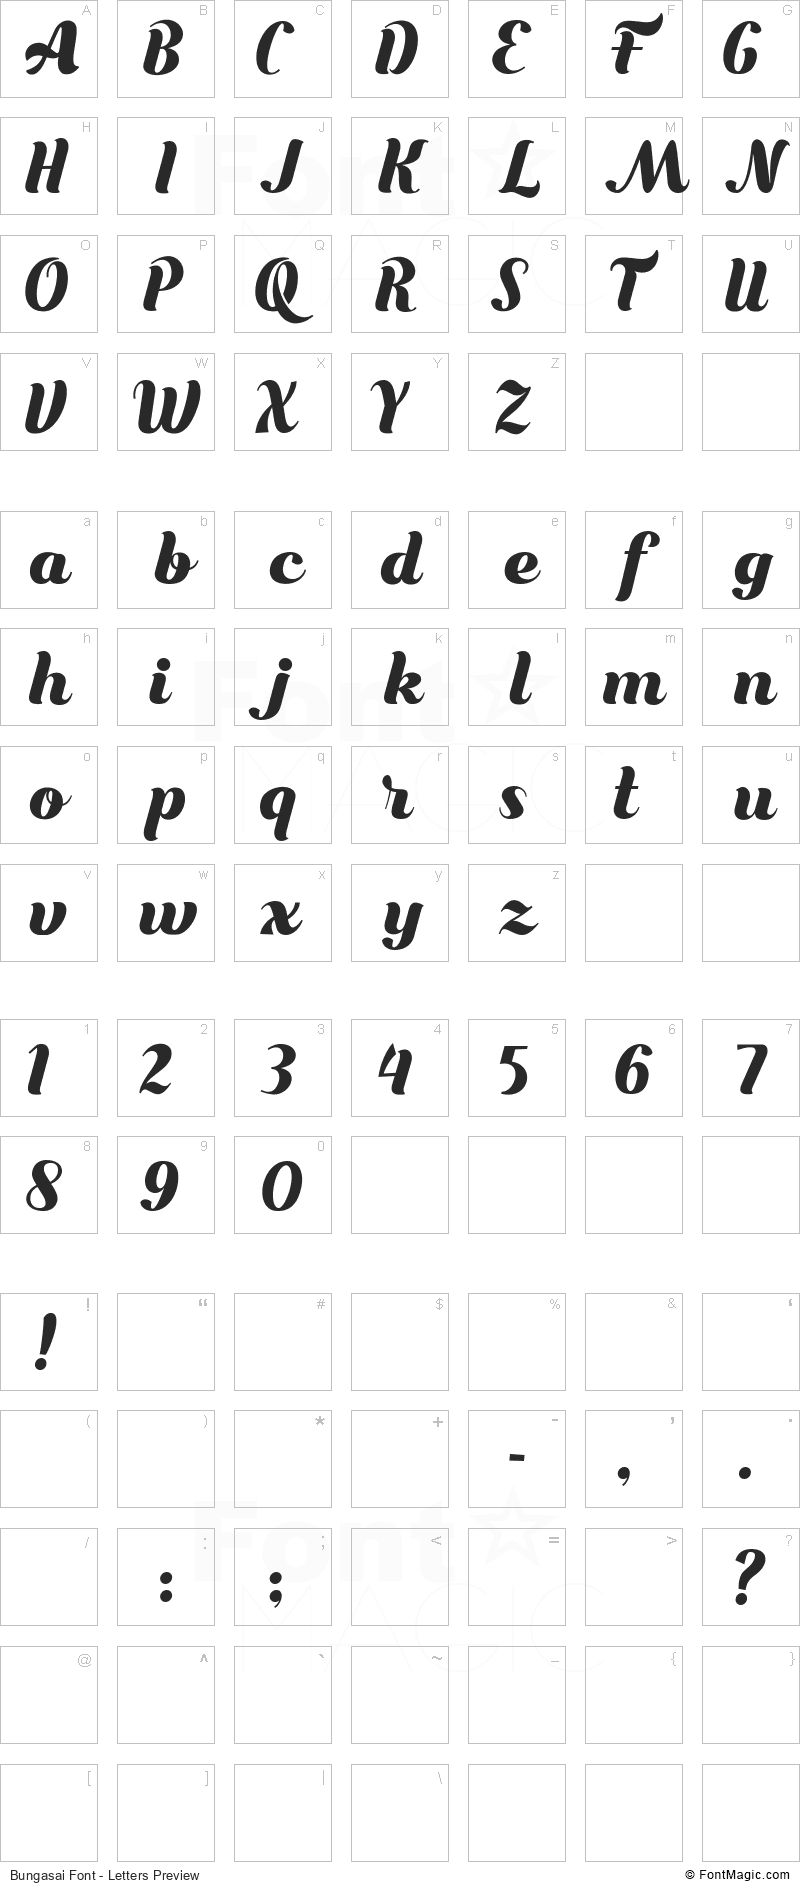 Bungasai Font - All Latters Preview Chart